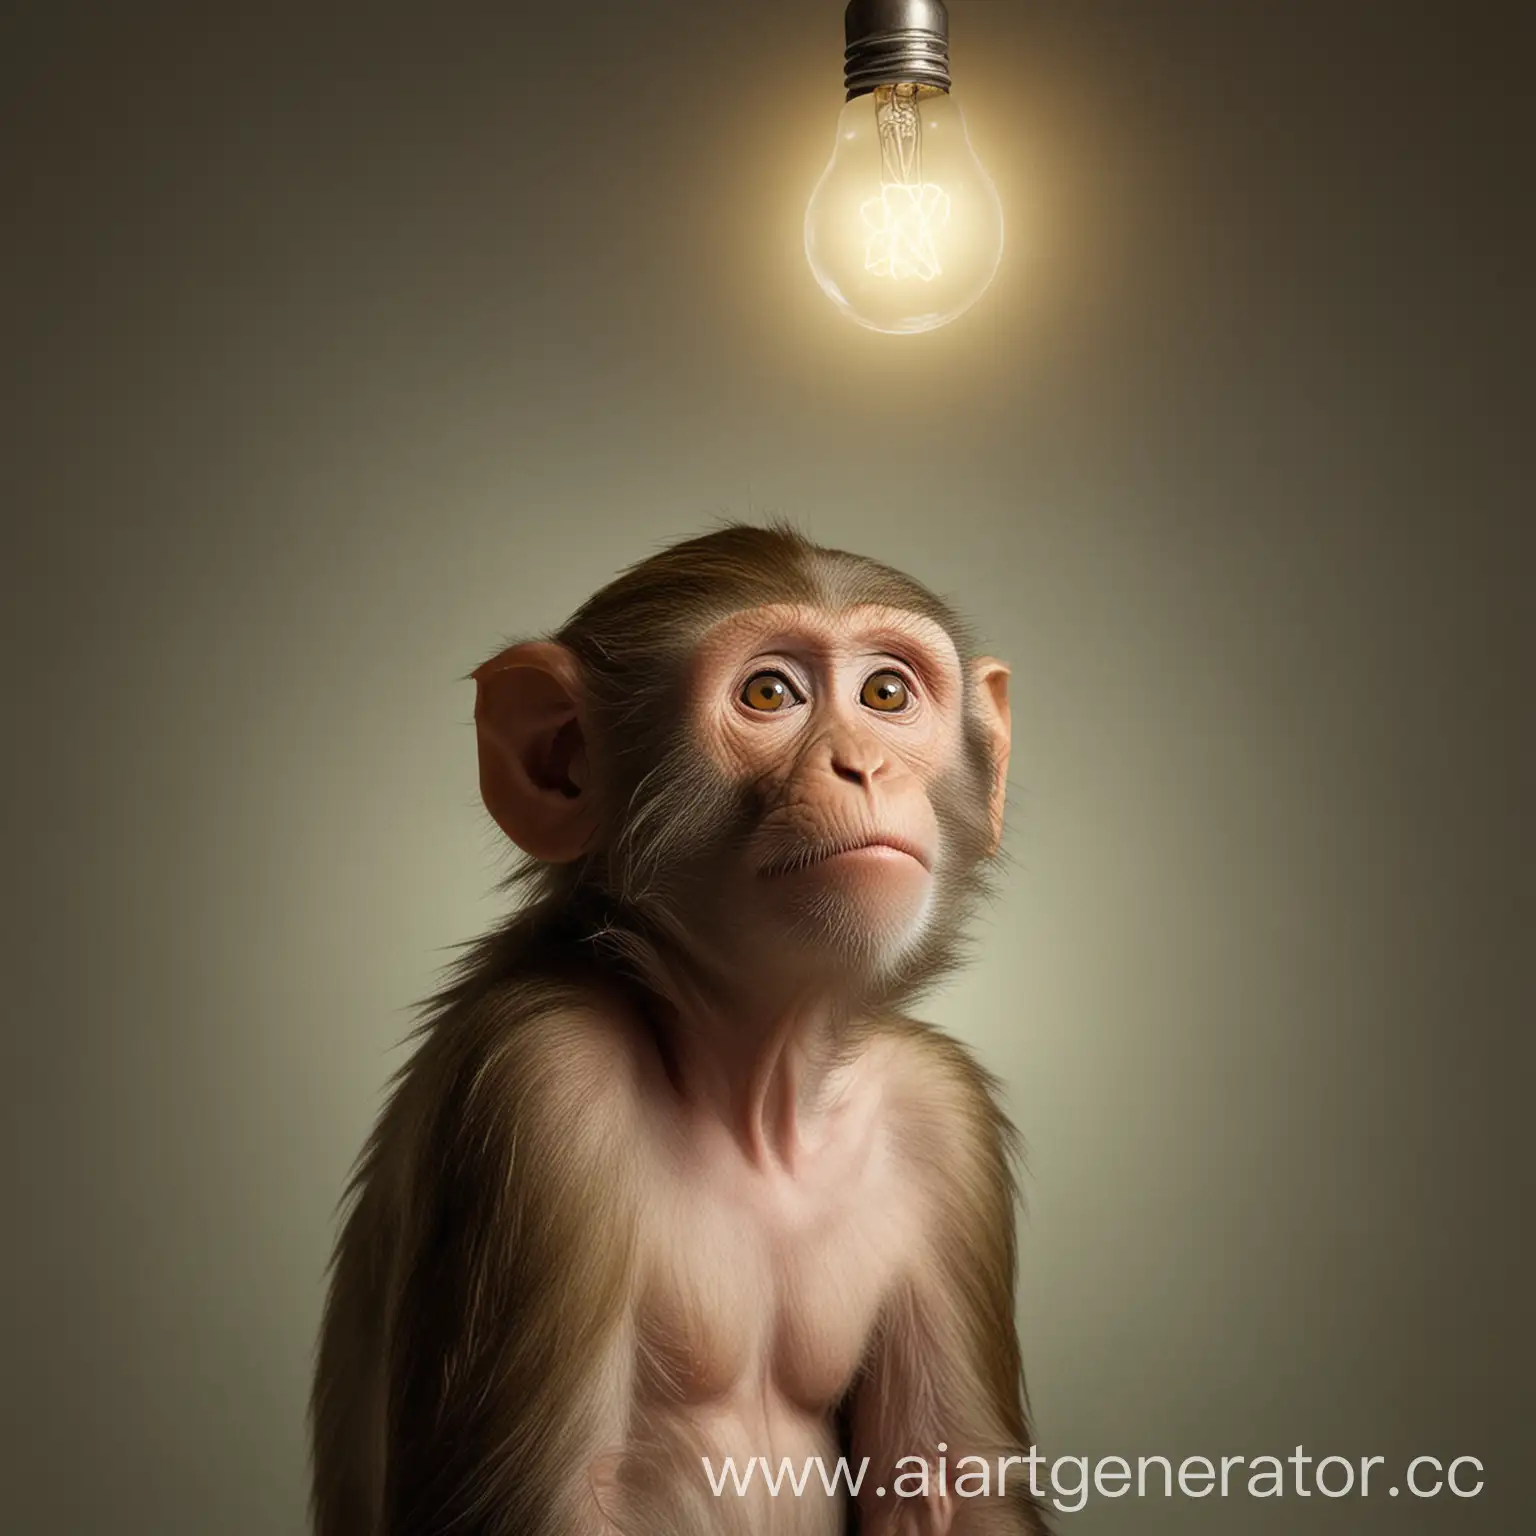 Clever-Monkey-with-Bright-Idea-Under-Light-Bulb